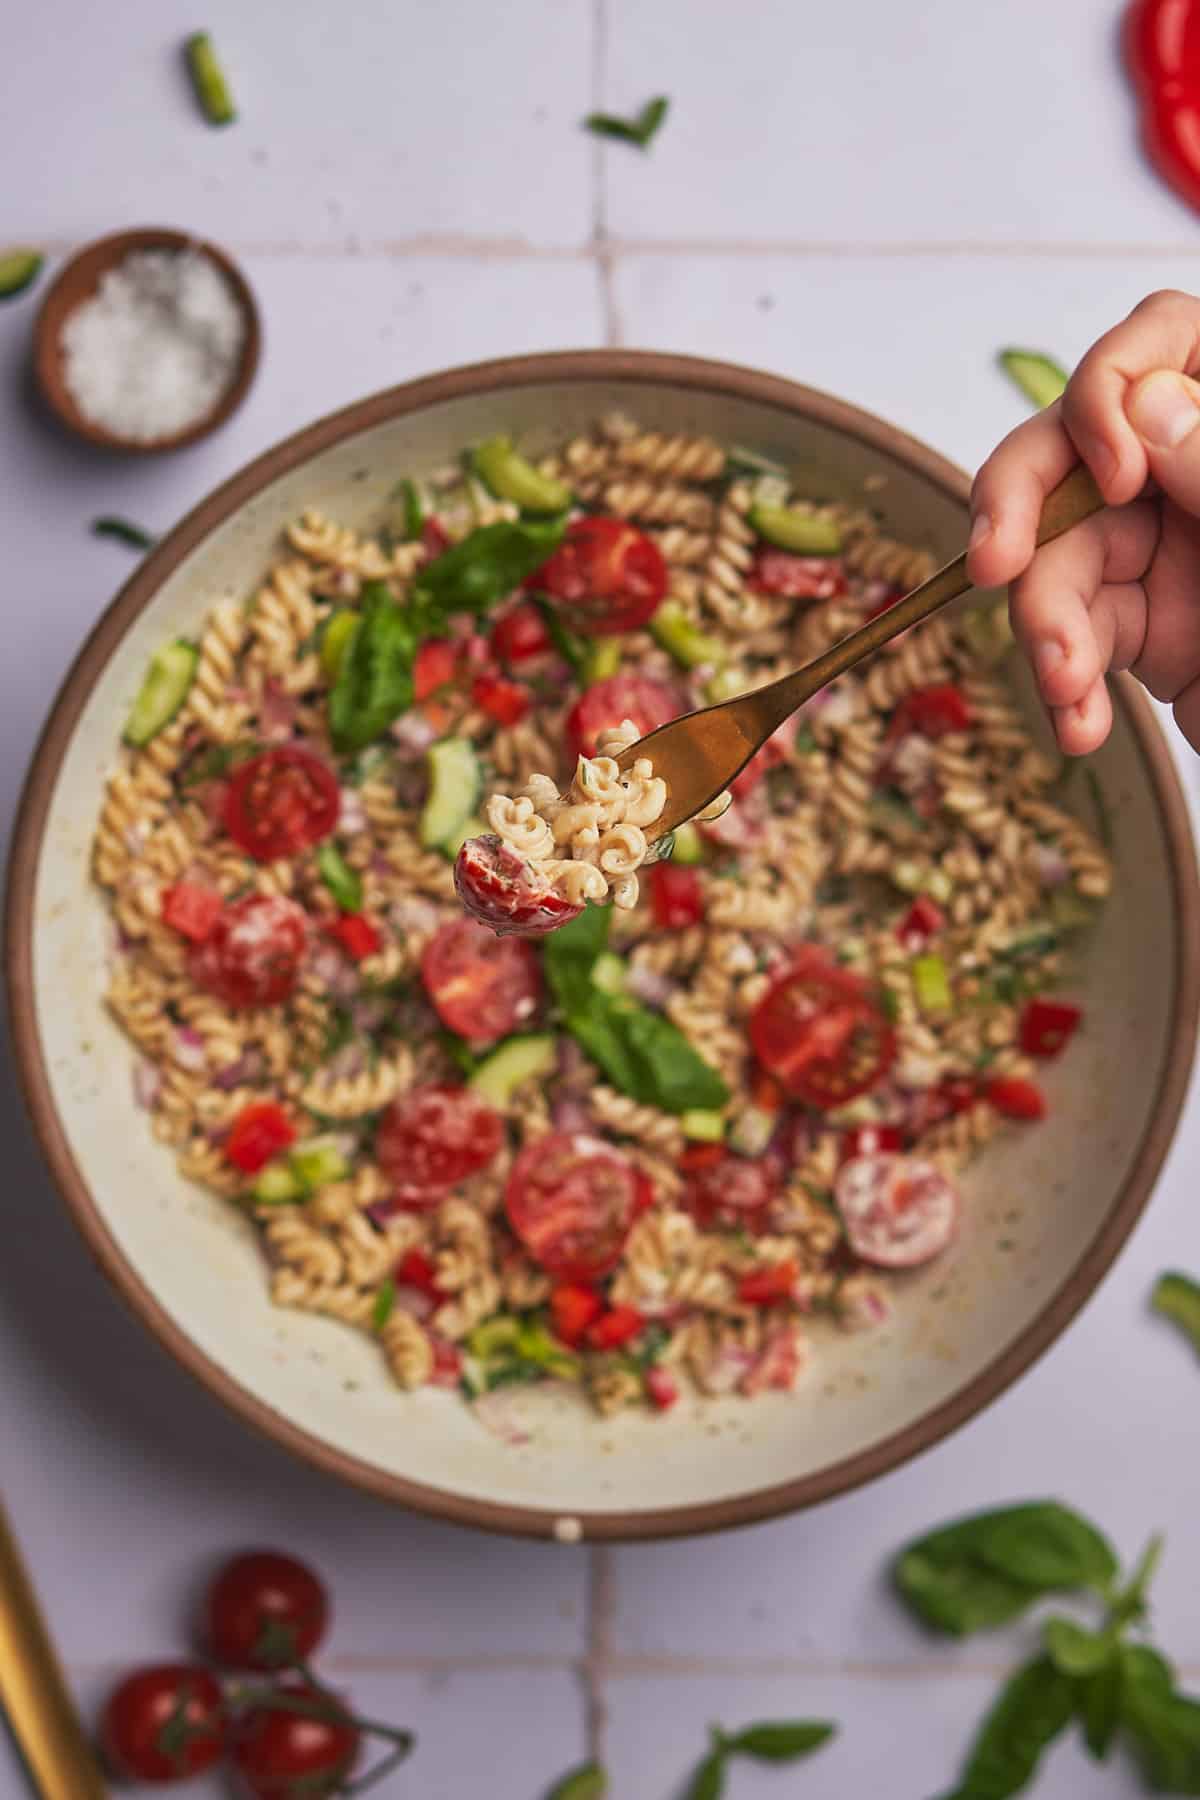 hand reaching into a large bowl of pasta salad with fresh vegetables and herbs.